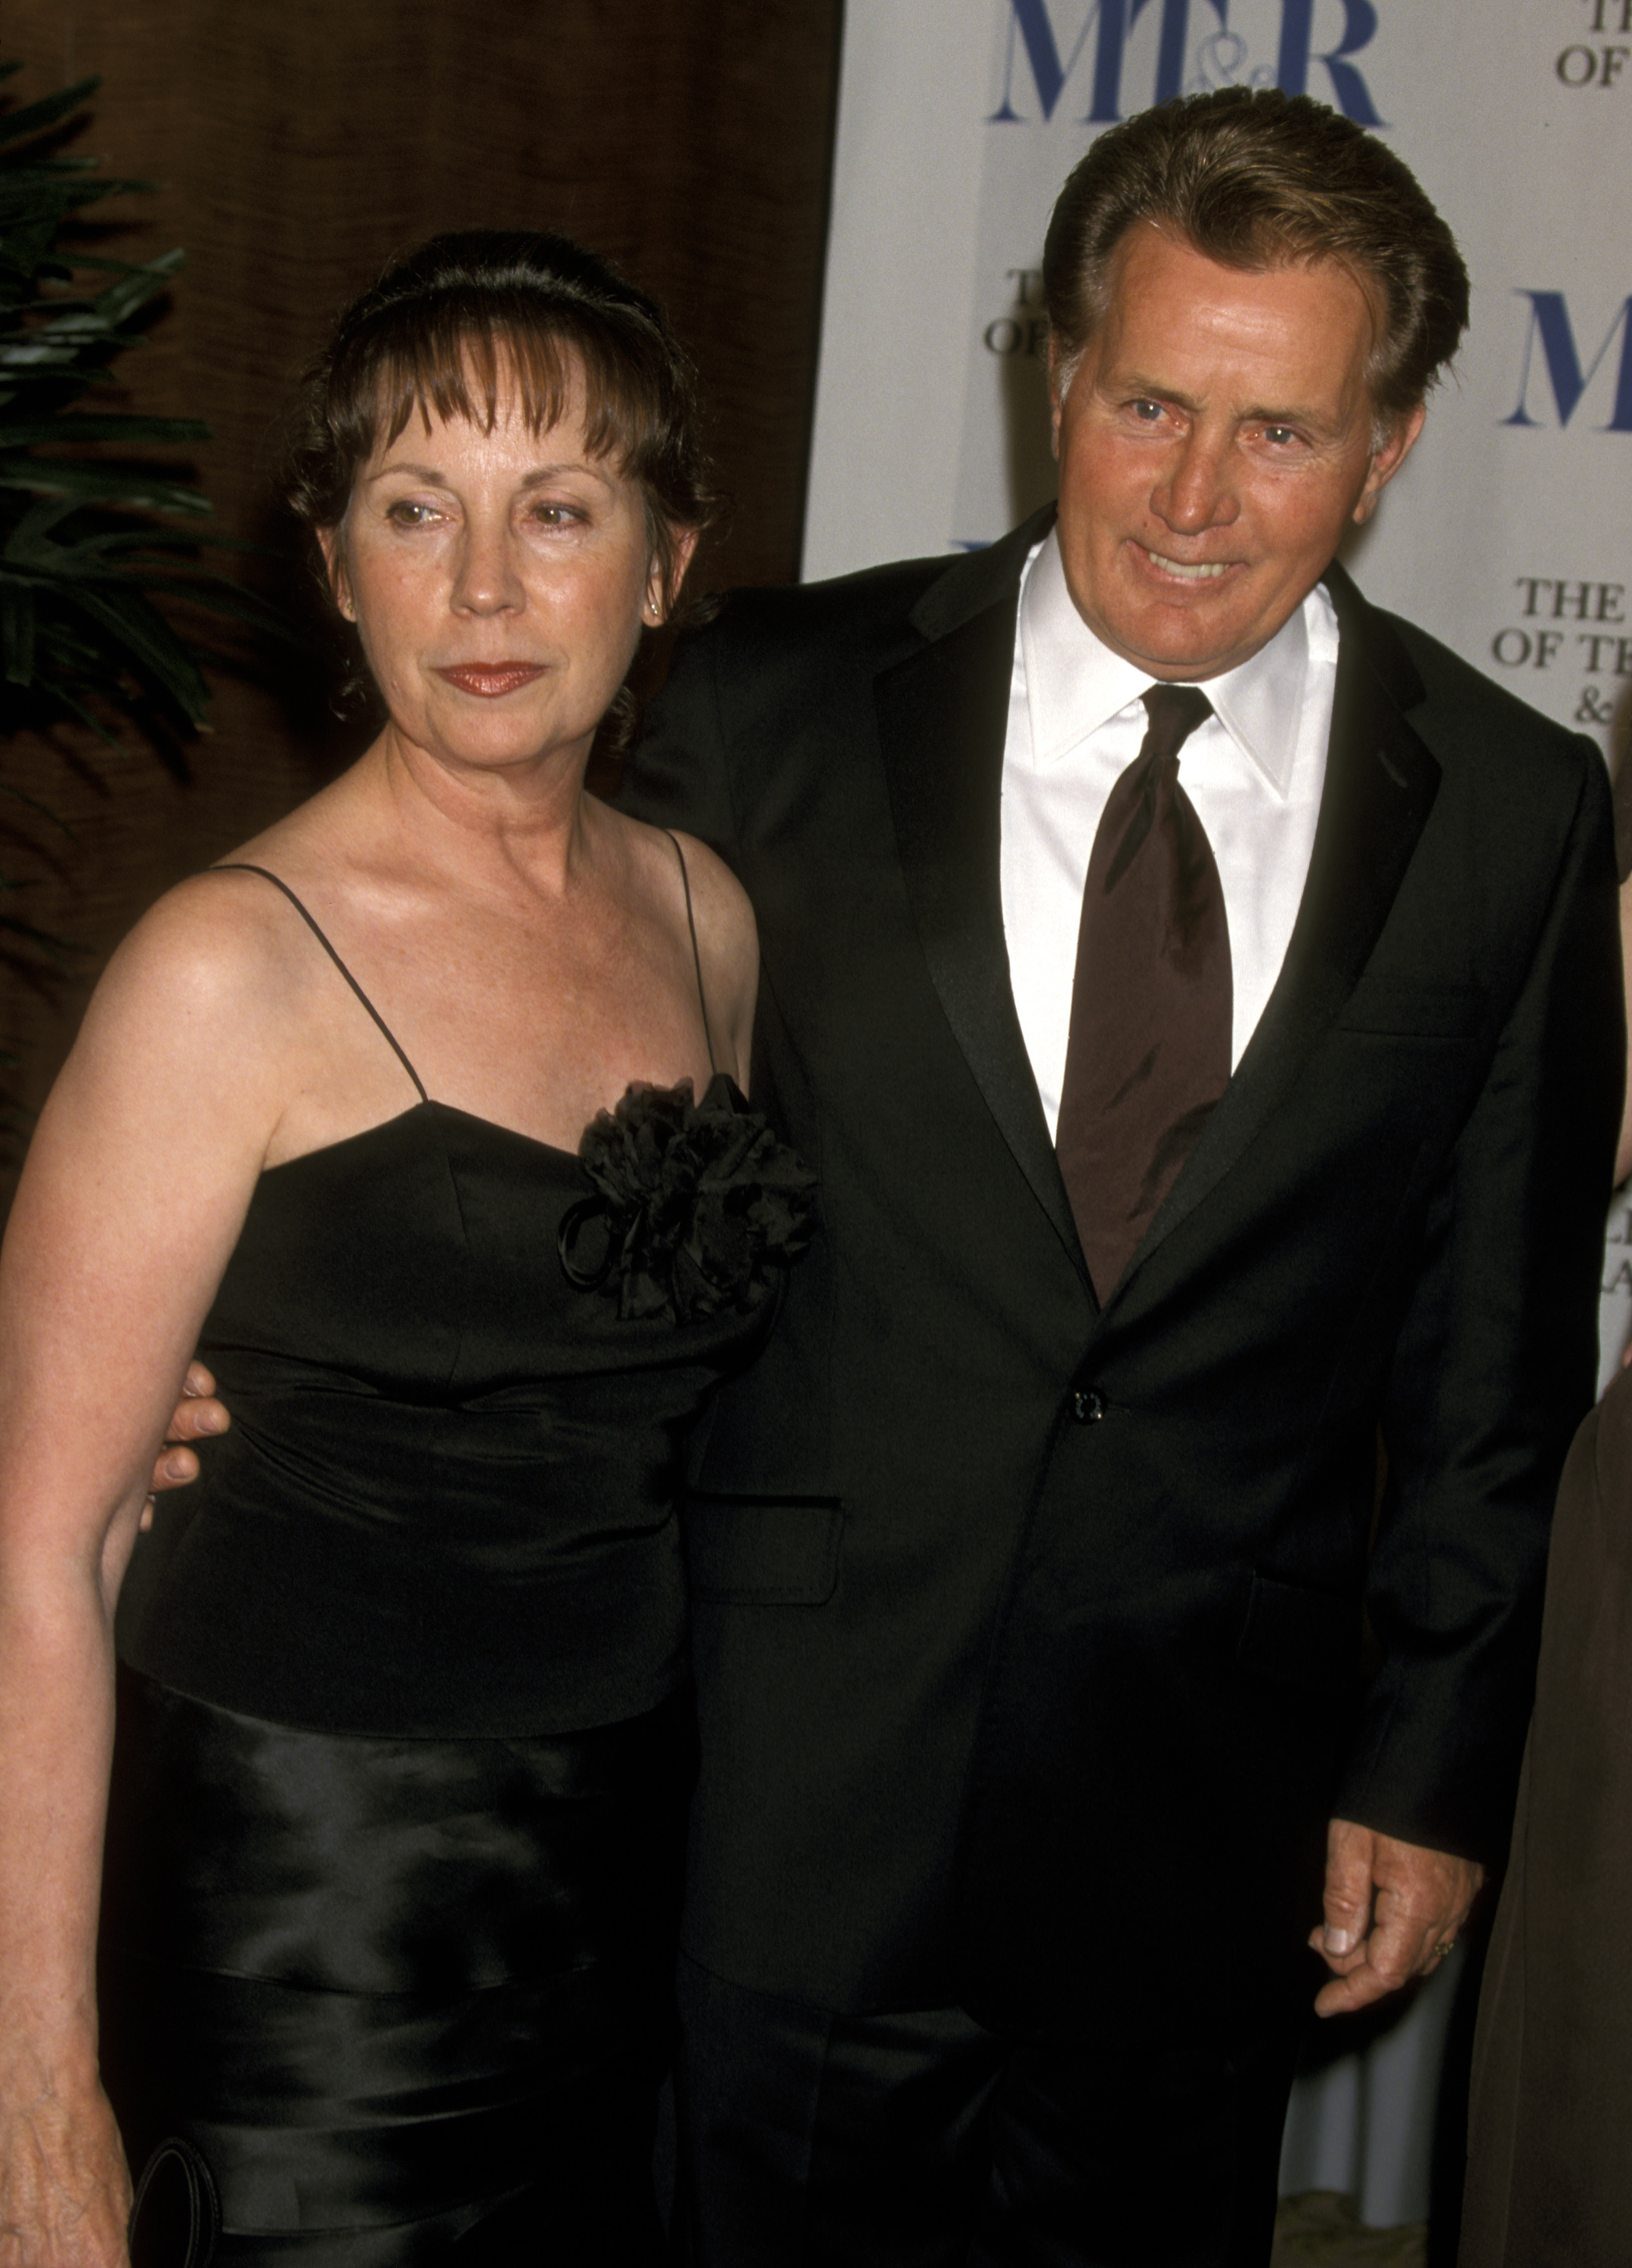 Martin Sheen and wife Janet Sheen during The Museum of Television & Radio's Annual Gala to Salute James Burrows & Martin Sheen at The Beverly Hills Hotel in Beverly Hills, California on November 11, 2001 | Source: Getty Images